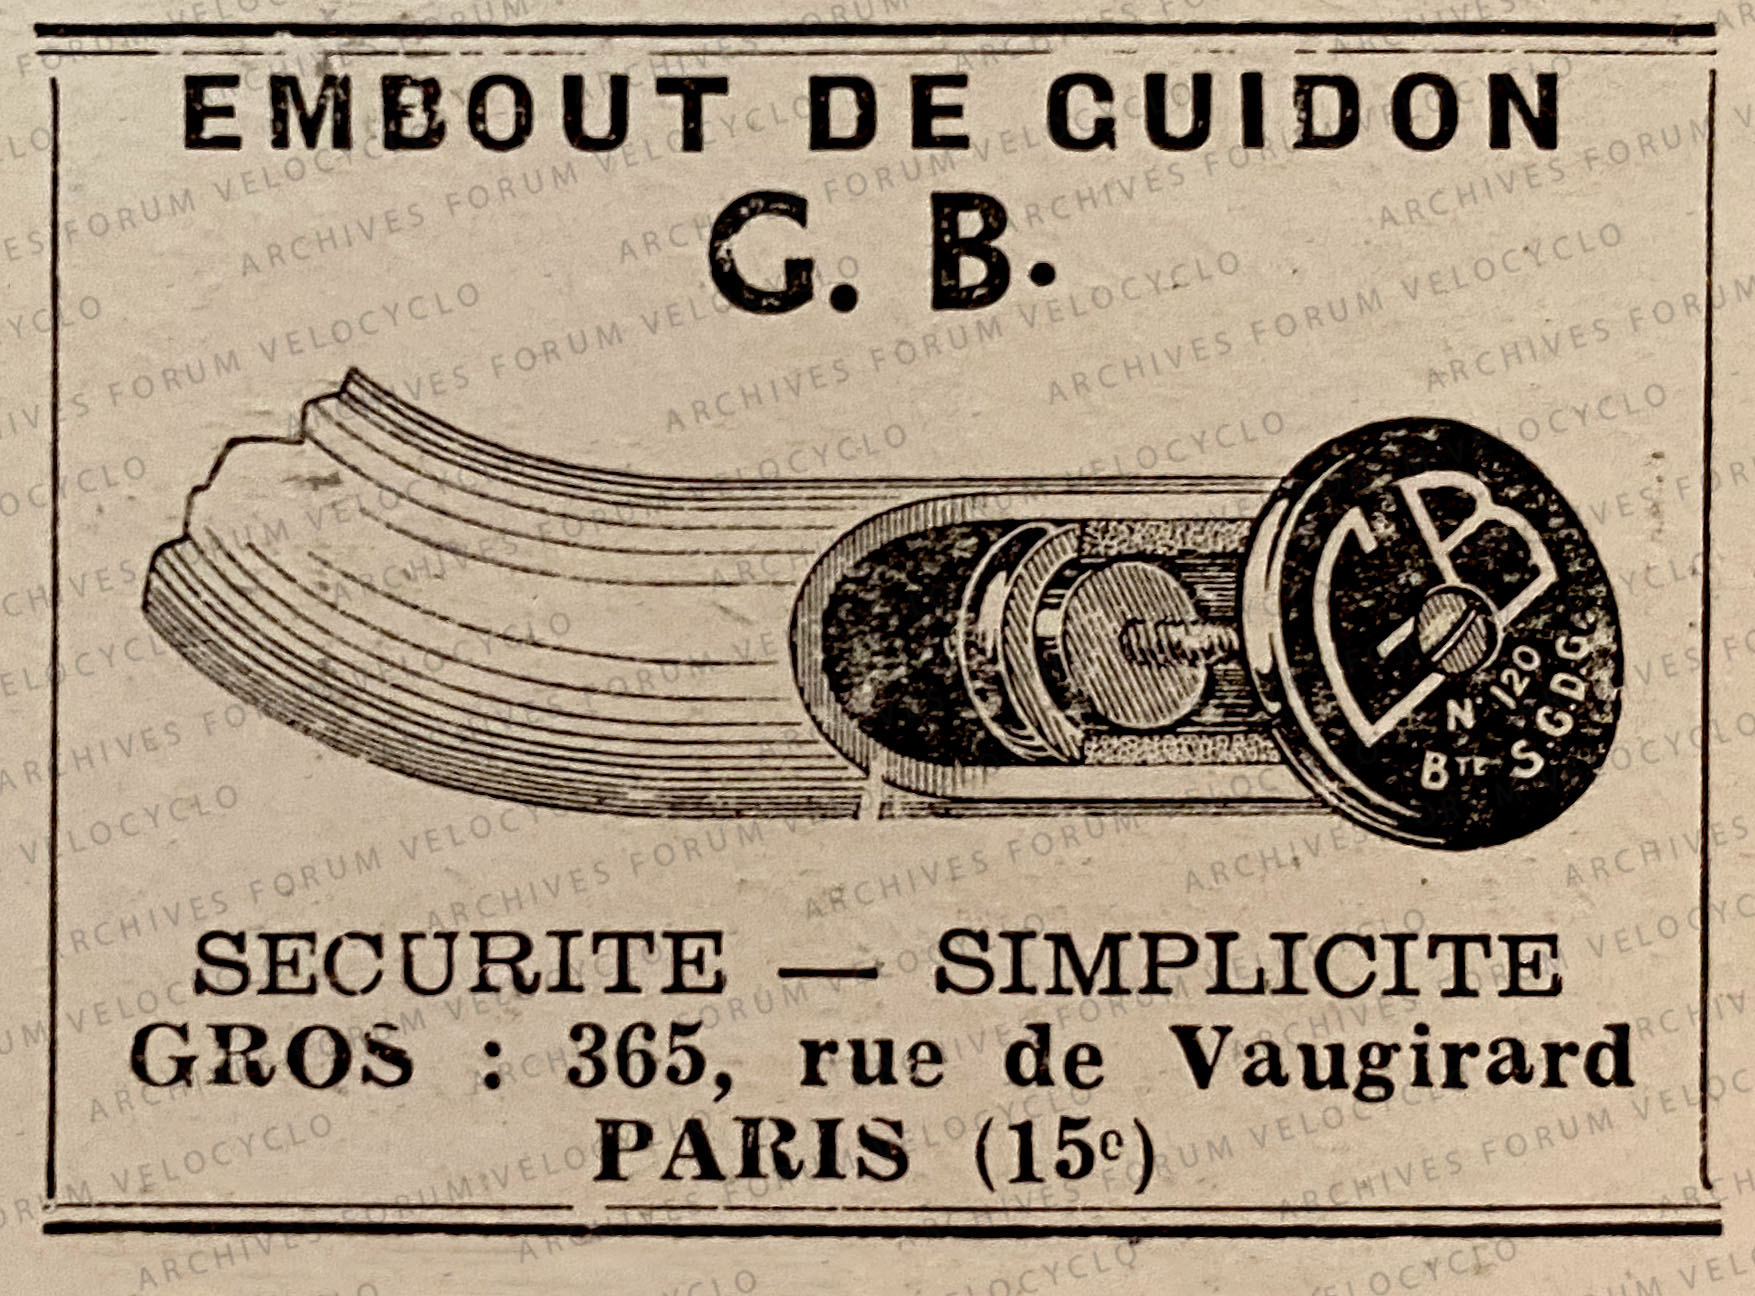 EMBOUT GUDION GB LE CYCLE 1955 VELOCYCLO 2